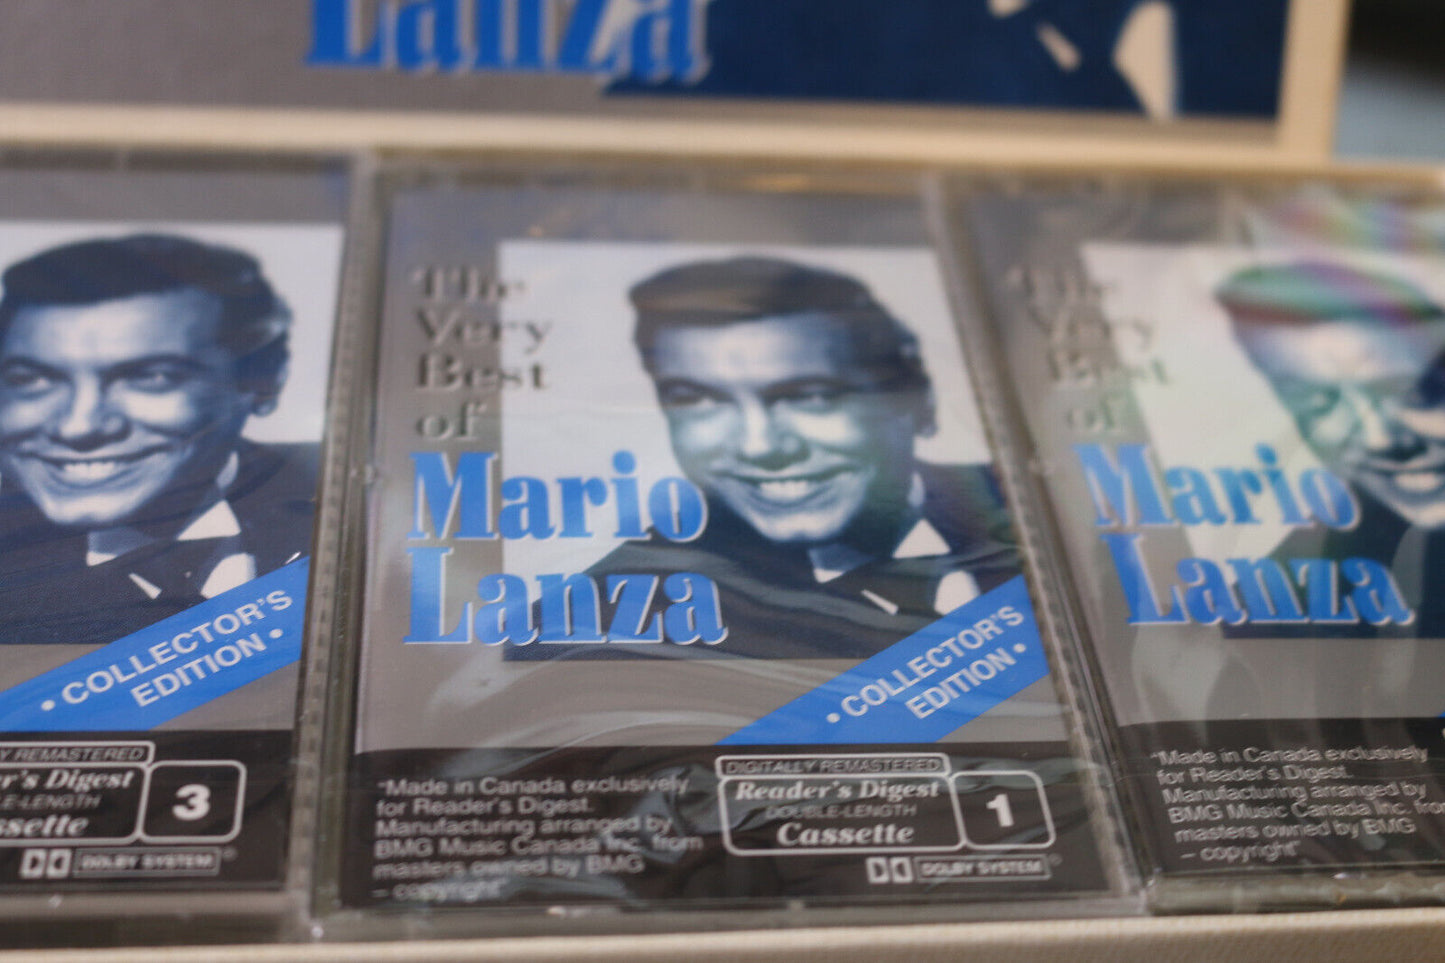 The Very Best Of Mario Lanza Collector'S Edition Vintage 3 Cassette Tapes Sealed